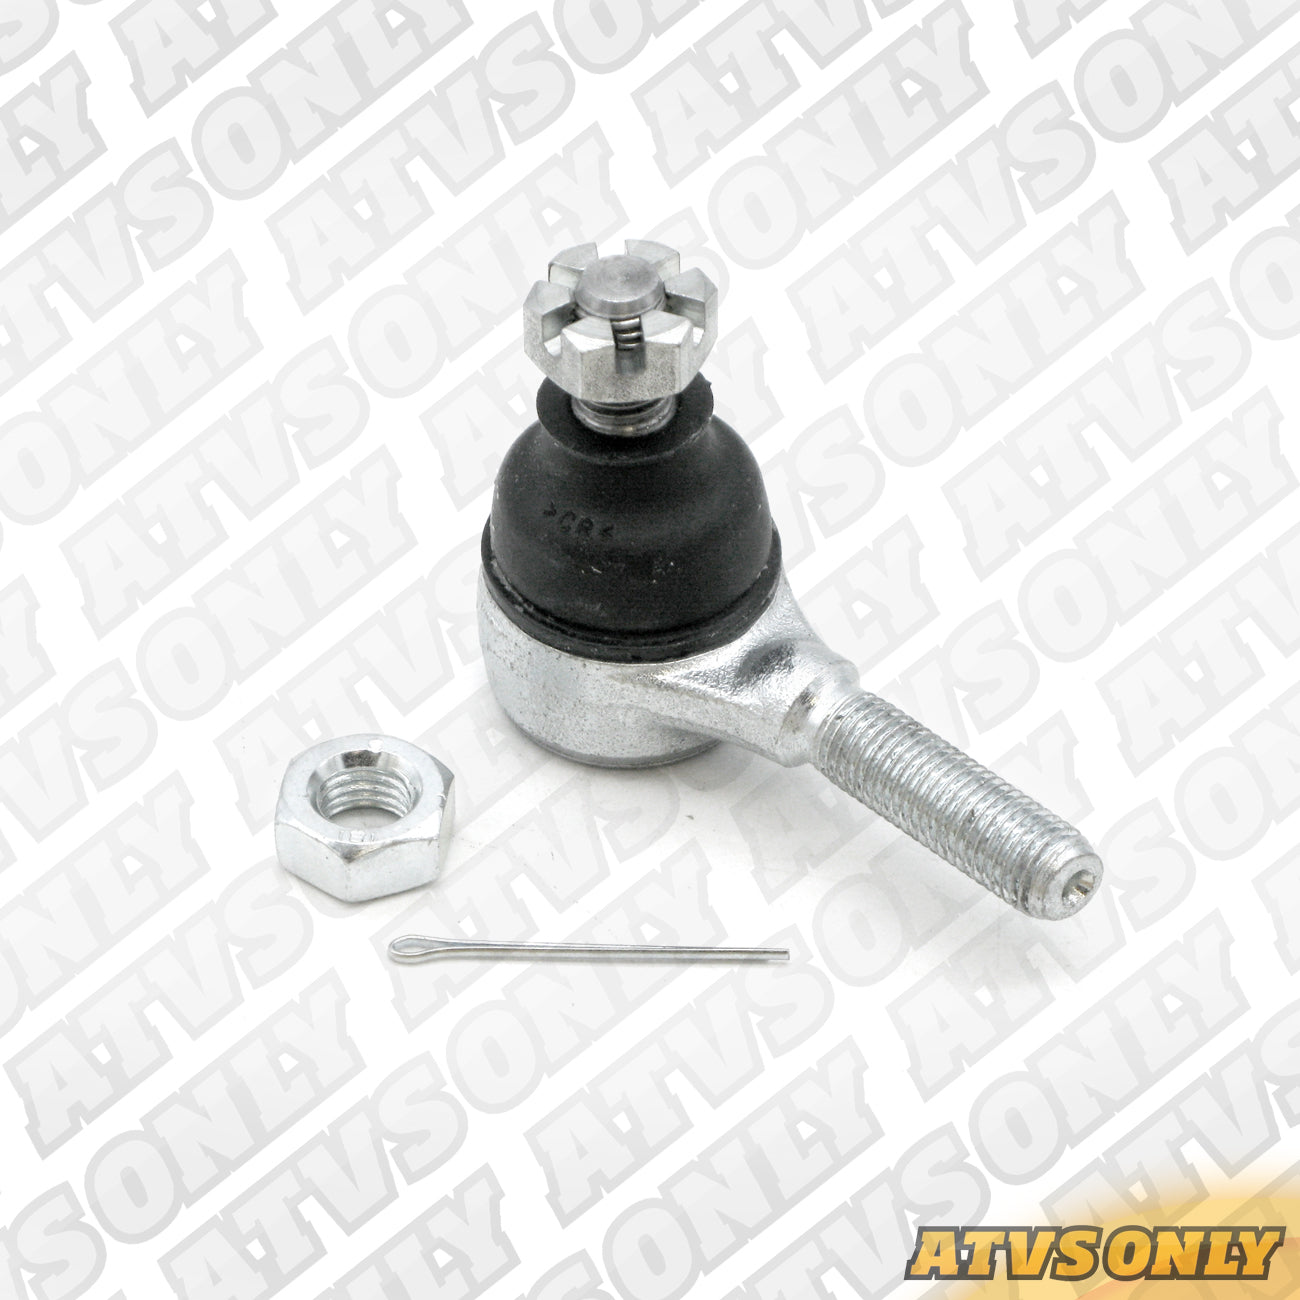 A-Arm Tie Rod End (Left & Right Handed Threads) for Yamaha/Suzuki Applications